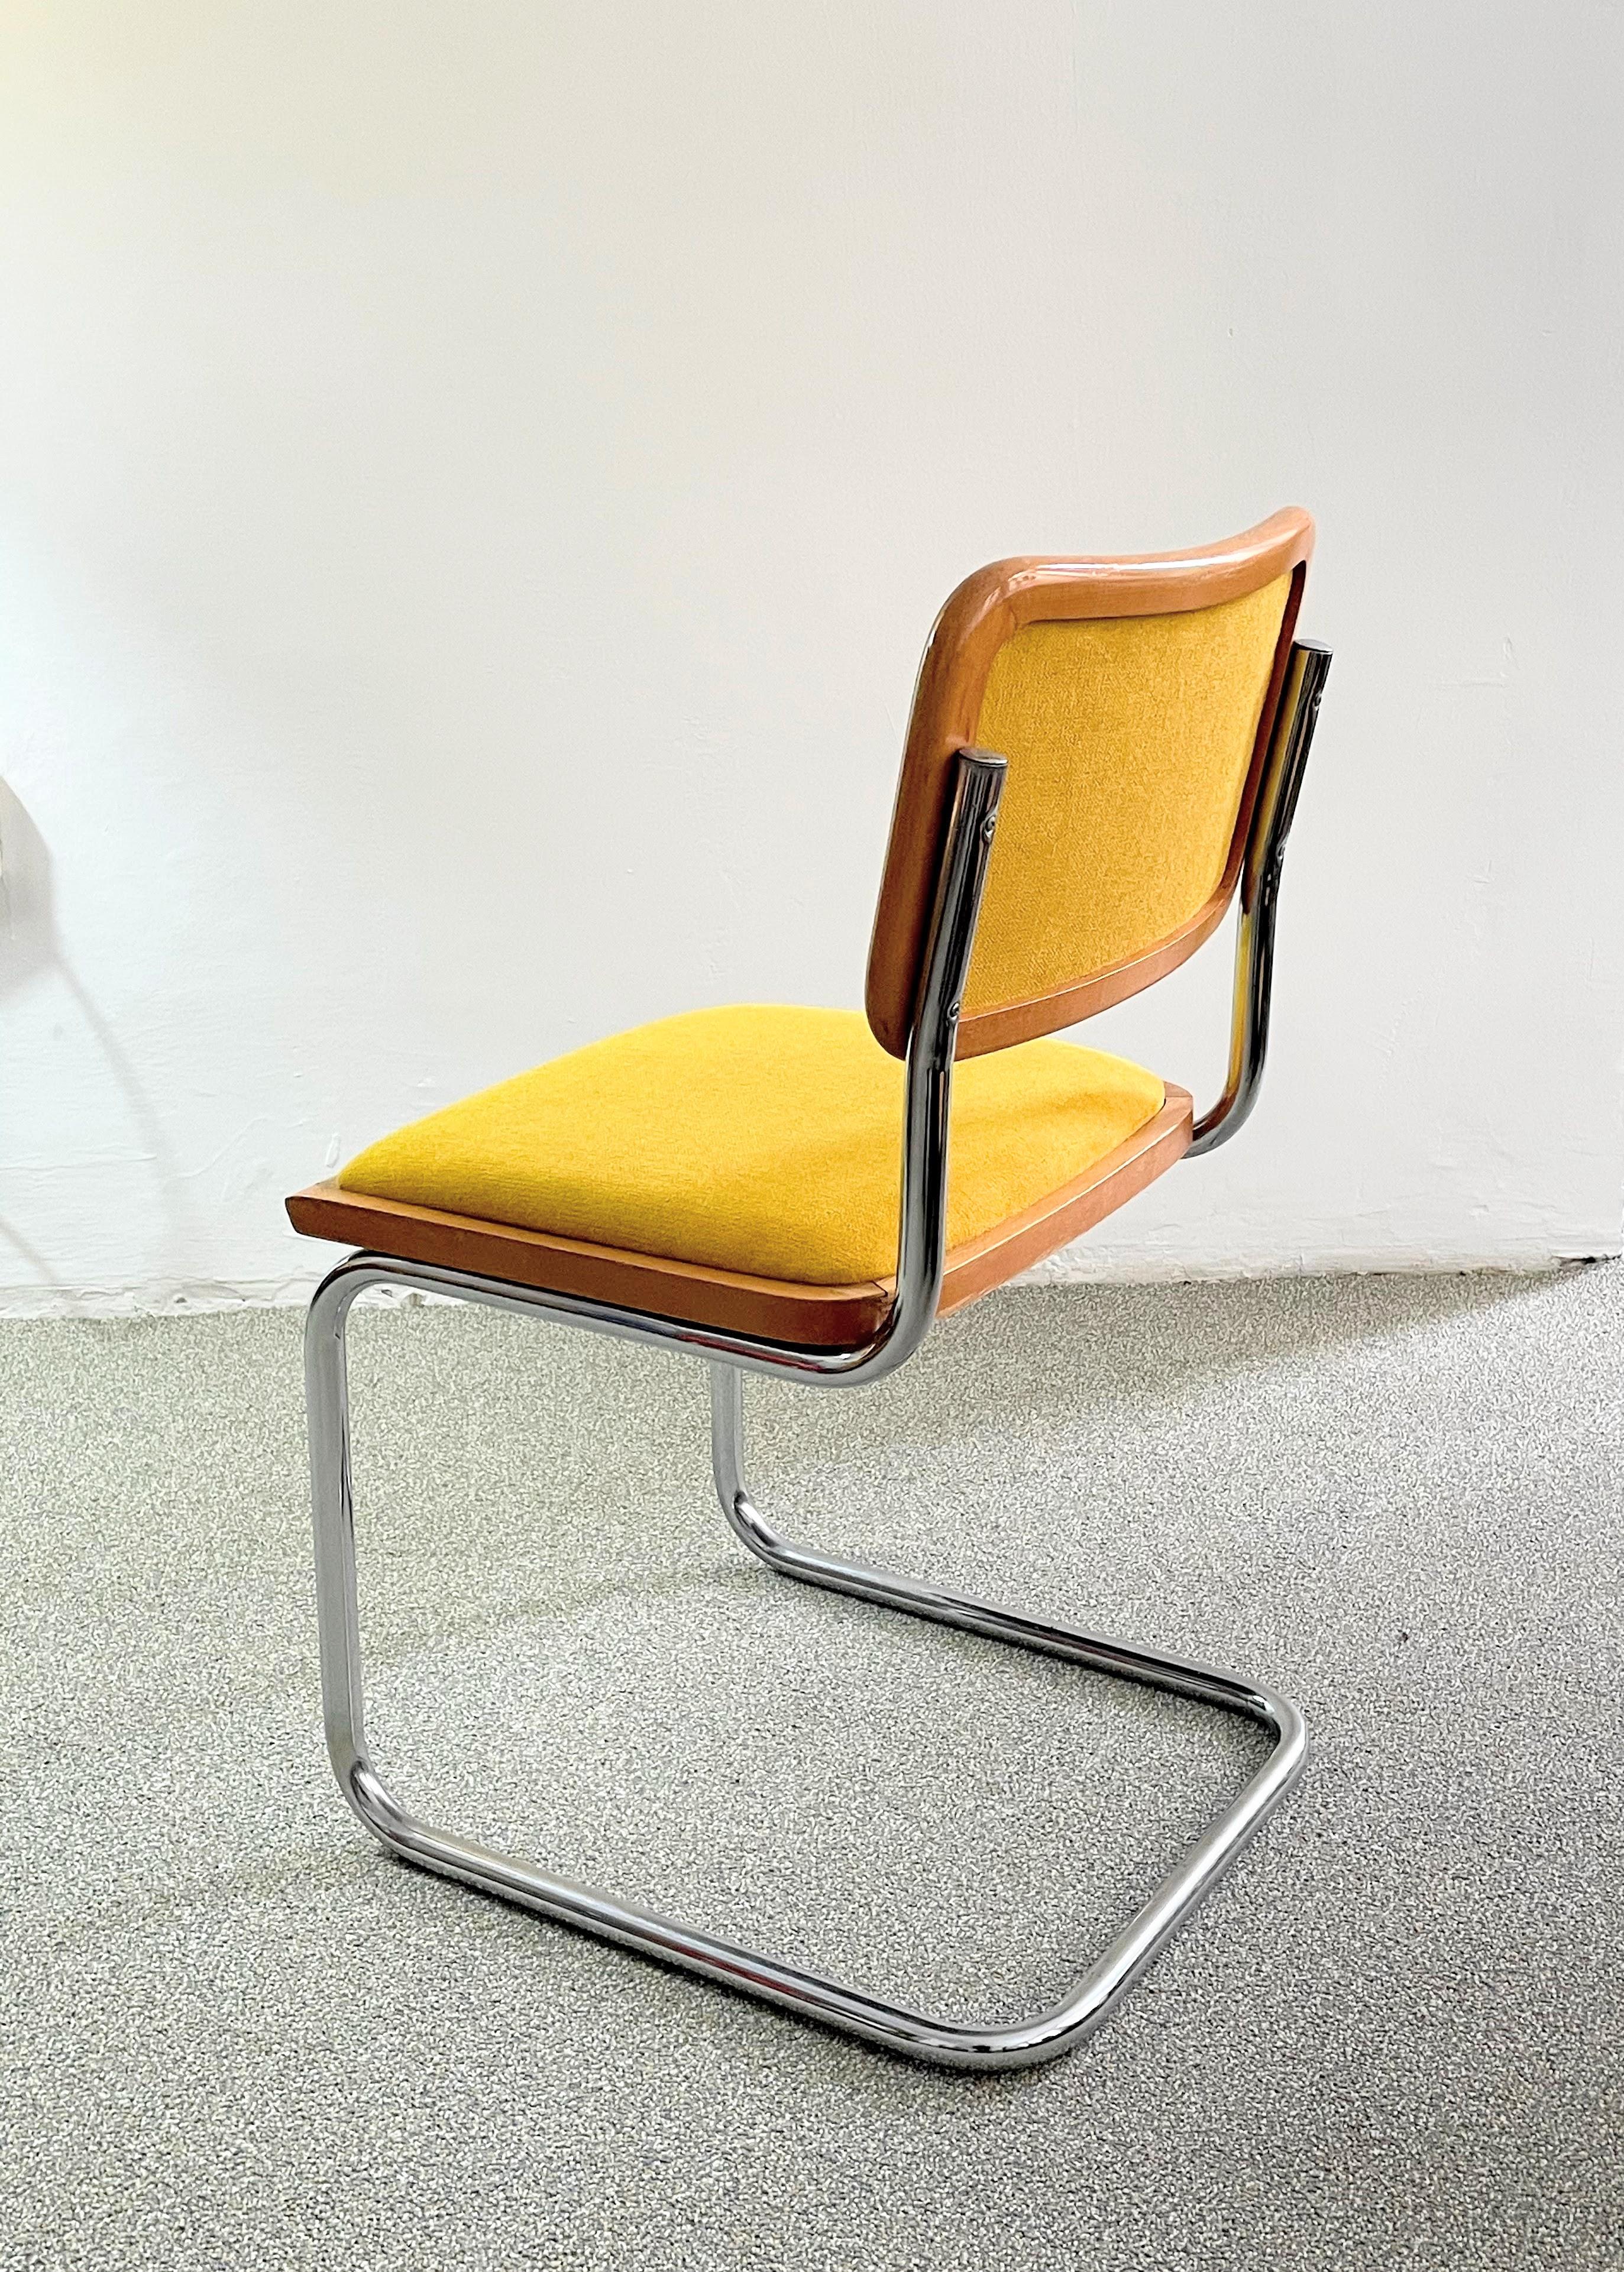 This B 32 /Cesca chair was manufactured in Austria in 1980s based on the 1928 design of the Hungarian designer, Breuer Marcell /Marcel Breuer.
Bene develops, designs and produces office furniture. Founded in 1790, Bene started to manufacture office